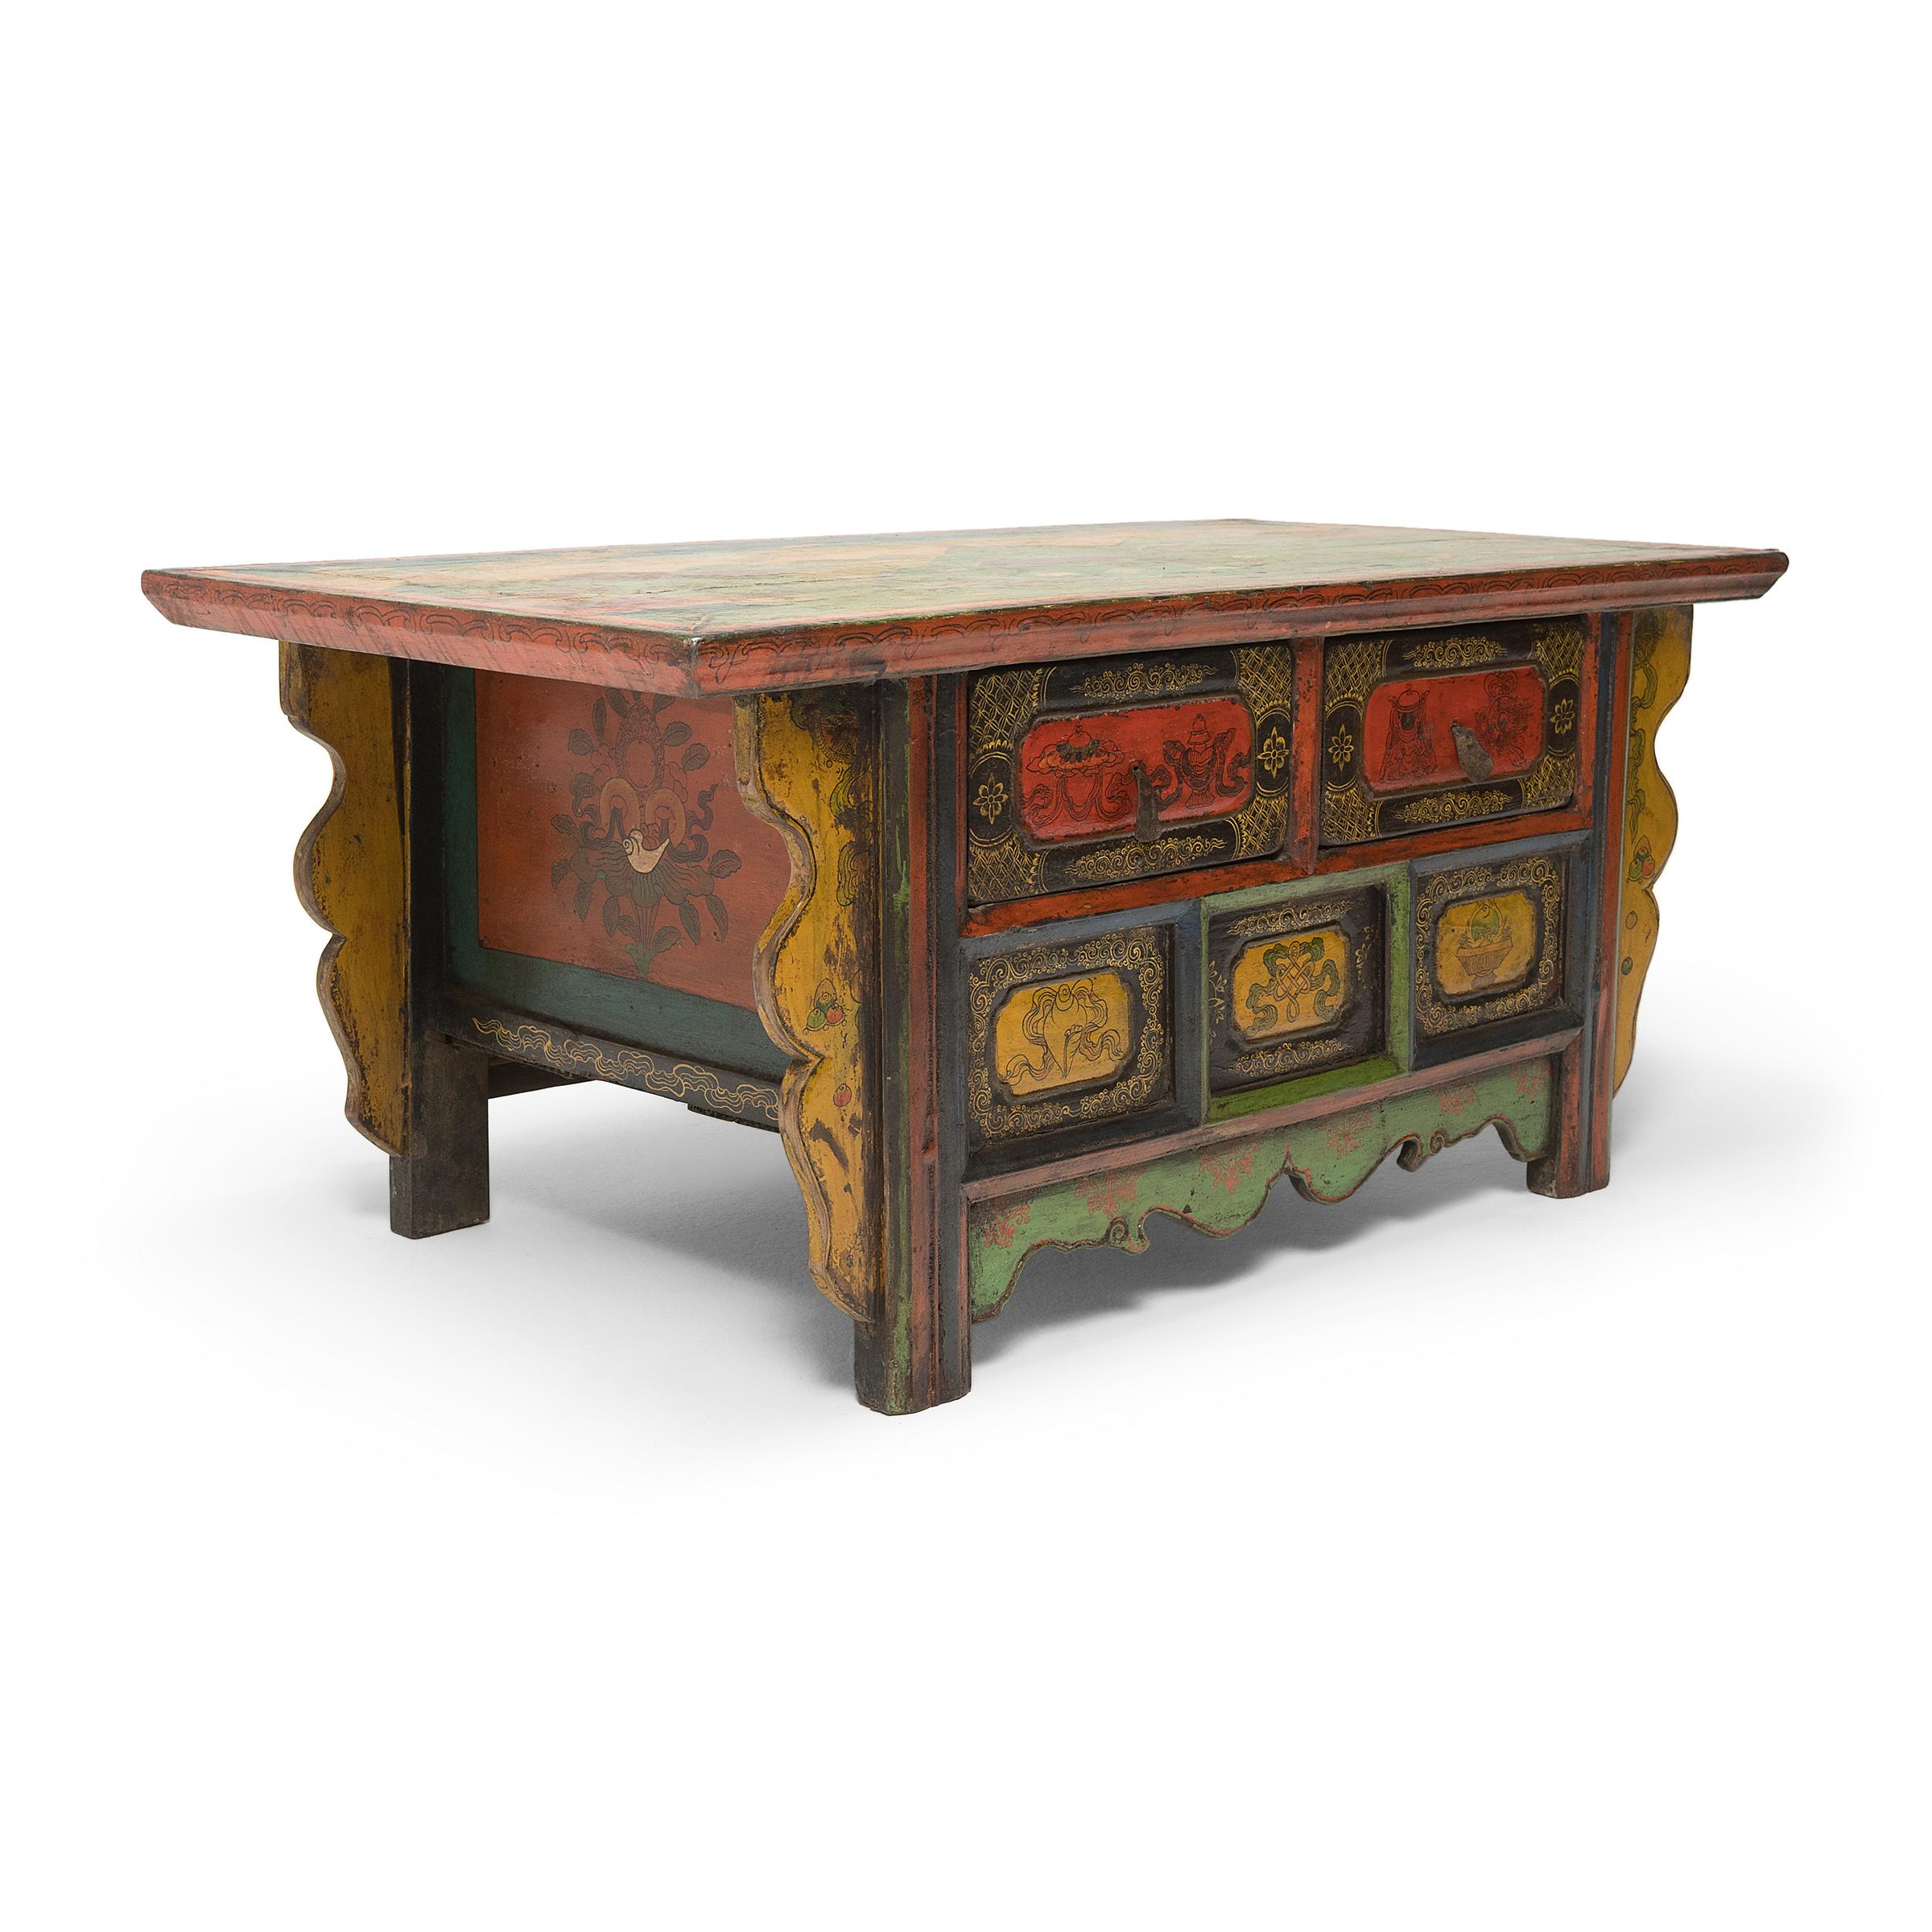 This low two-drawer chest is a 19th-century coffer from northern China or Mongolia and was repainted with bright colors in the early 20th century in the style of Tibetan painted furniture. The top surface has been painted with verdant mountainous